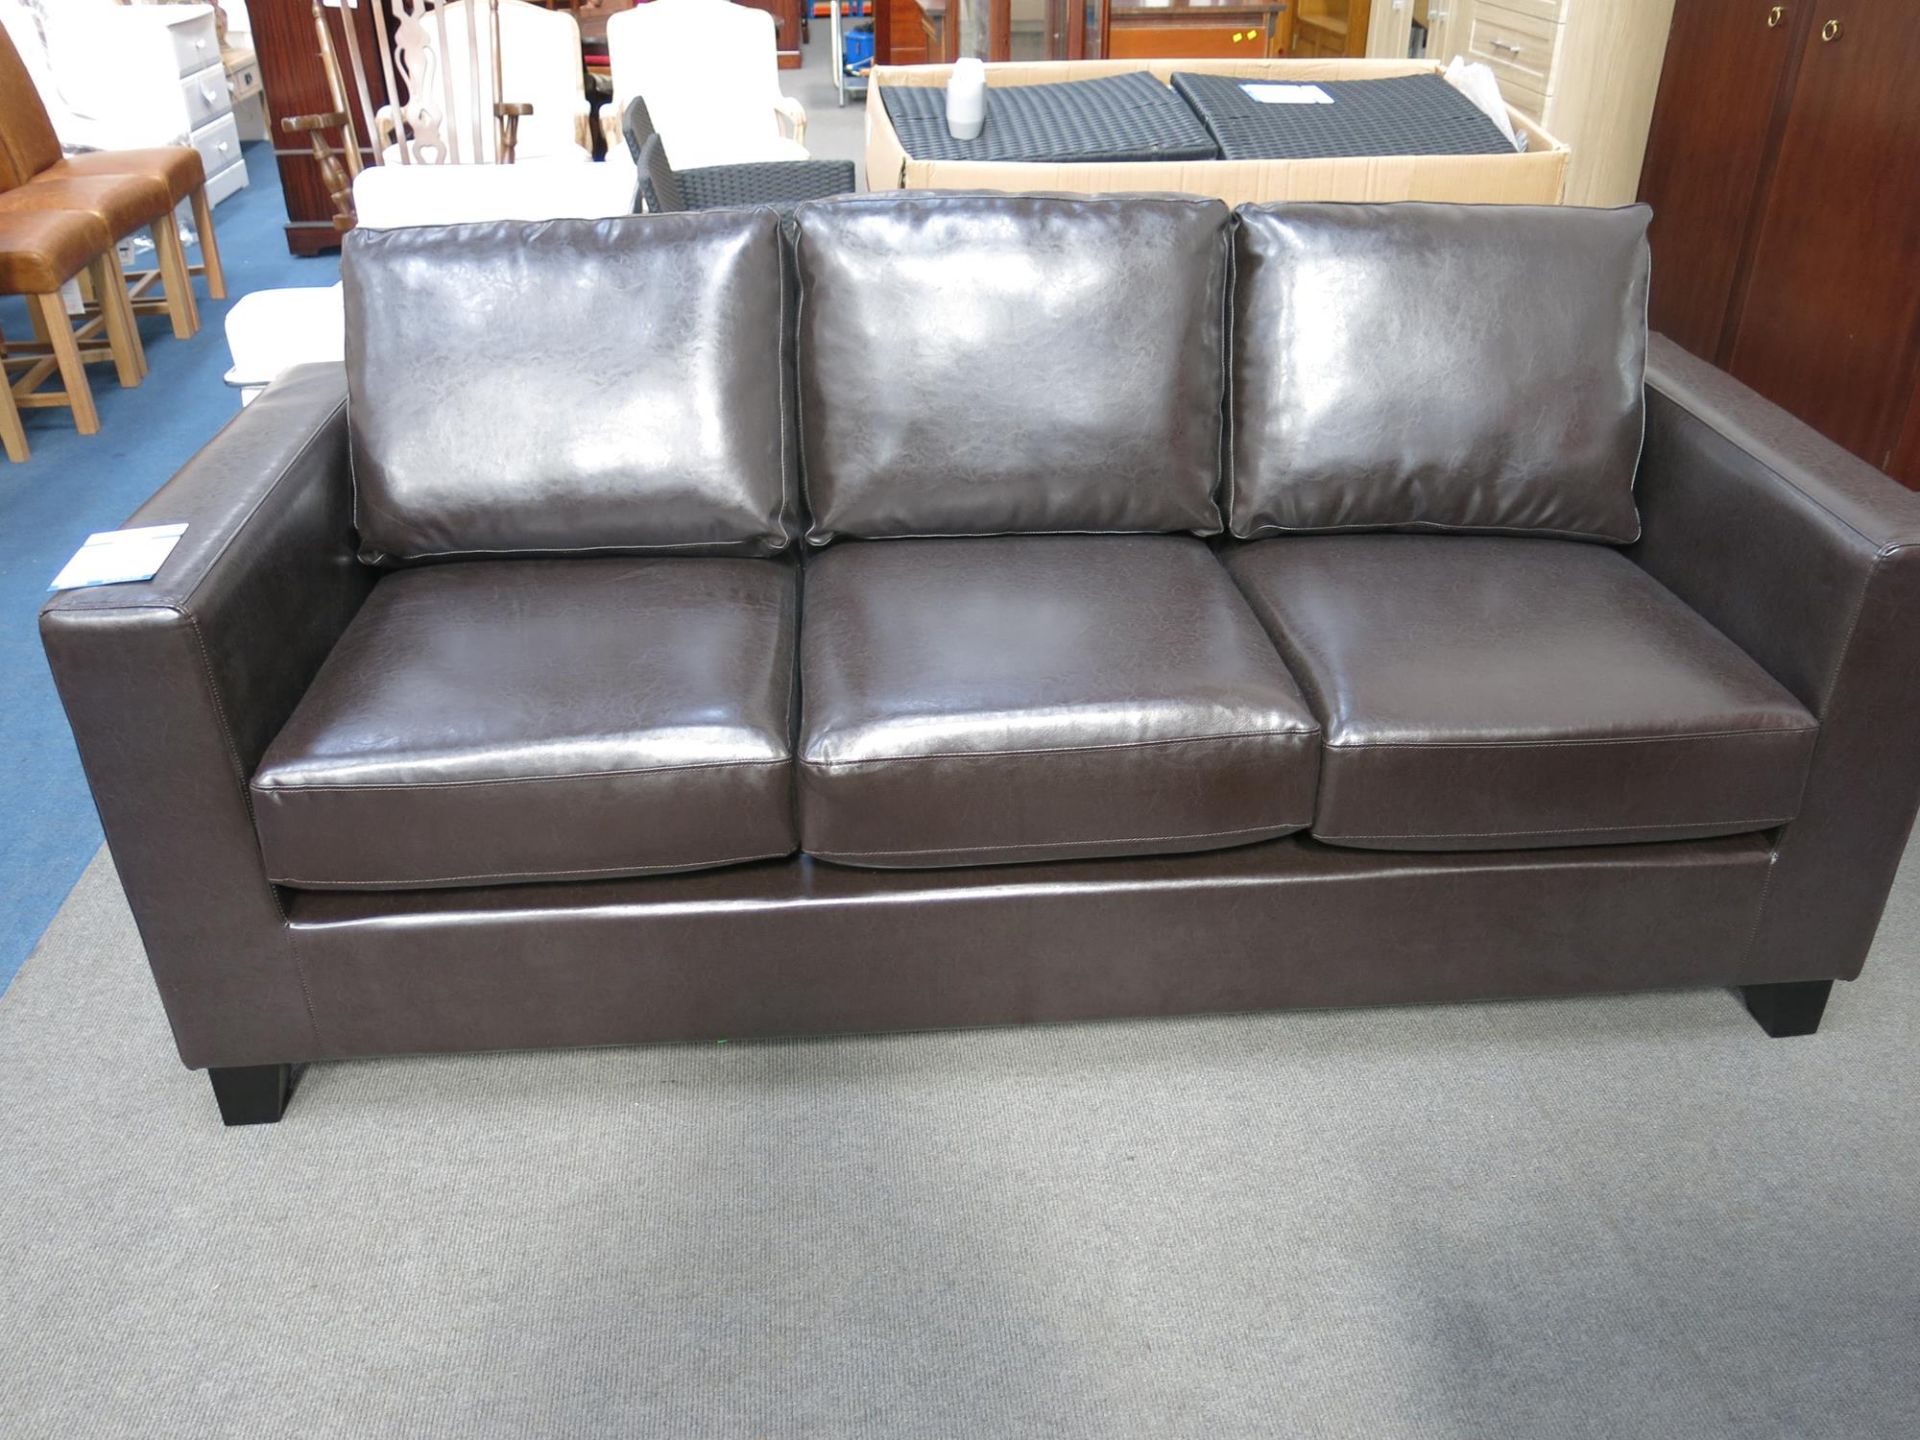 * An as new three seater sofa. The faux pu leather upholstery is brown in colour. Please note - Image 3 of 4